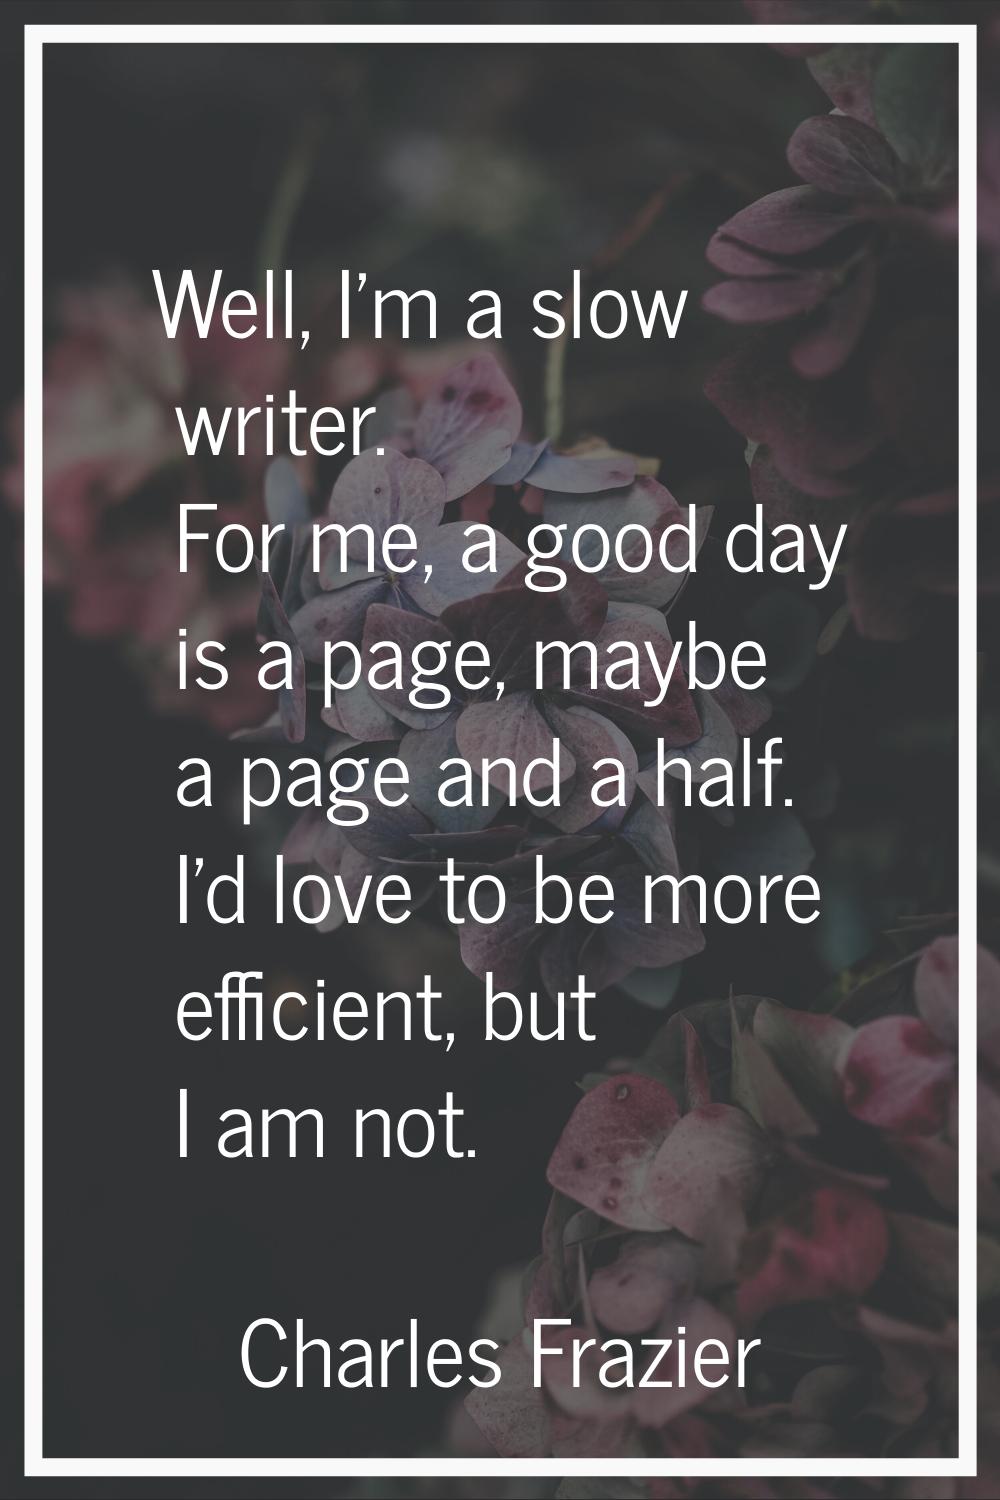 Well, I'm a slow writer. For me, a good day is a page, maybe a page and a half. I'd love to be more